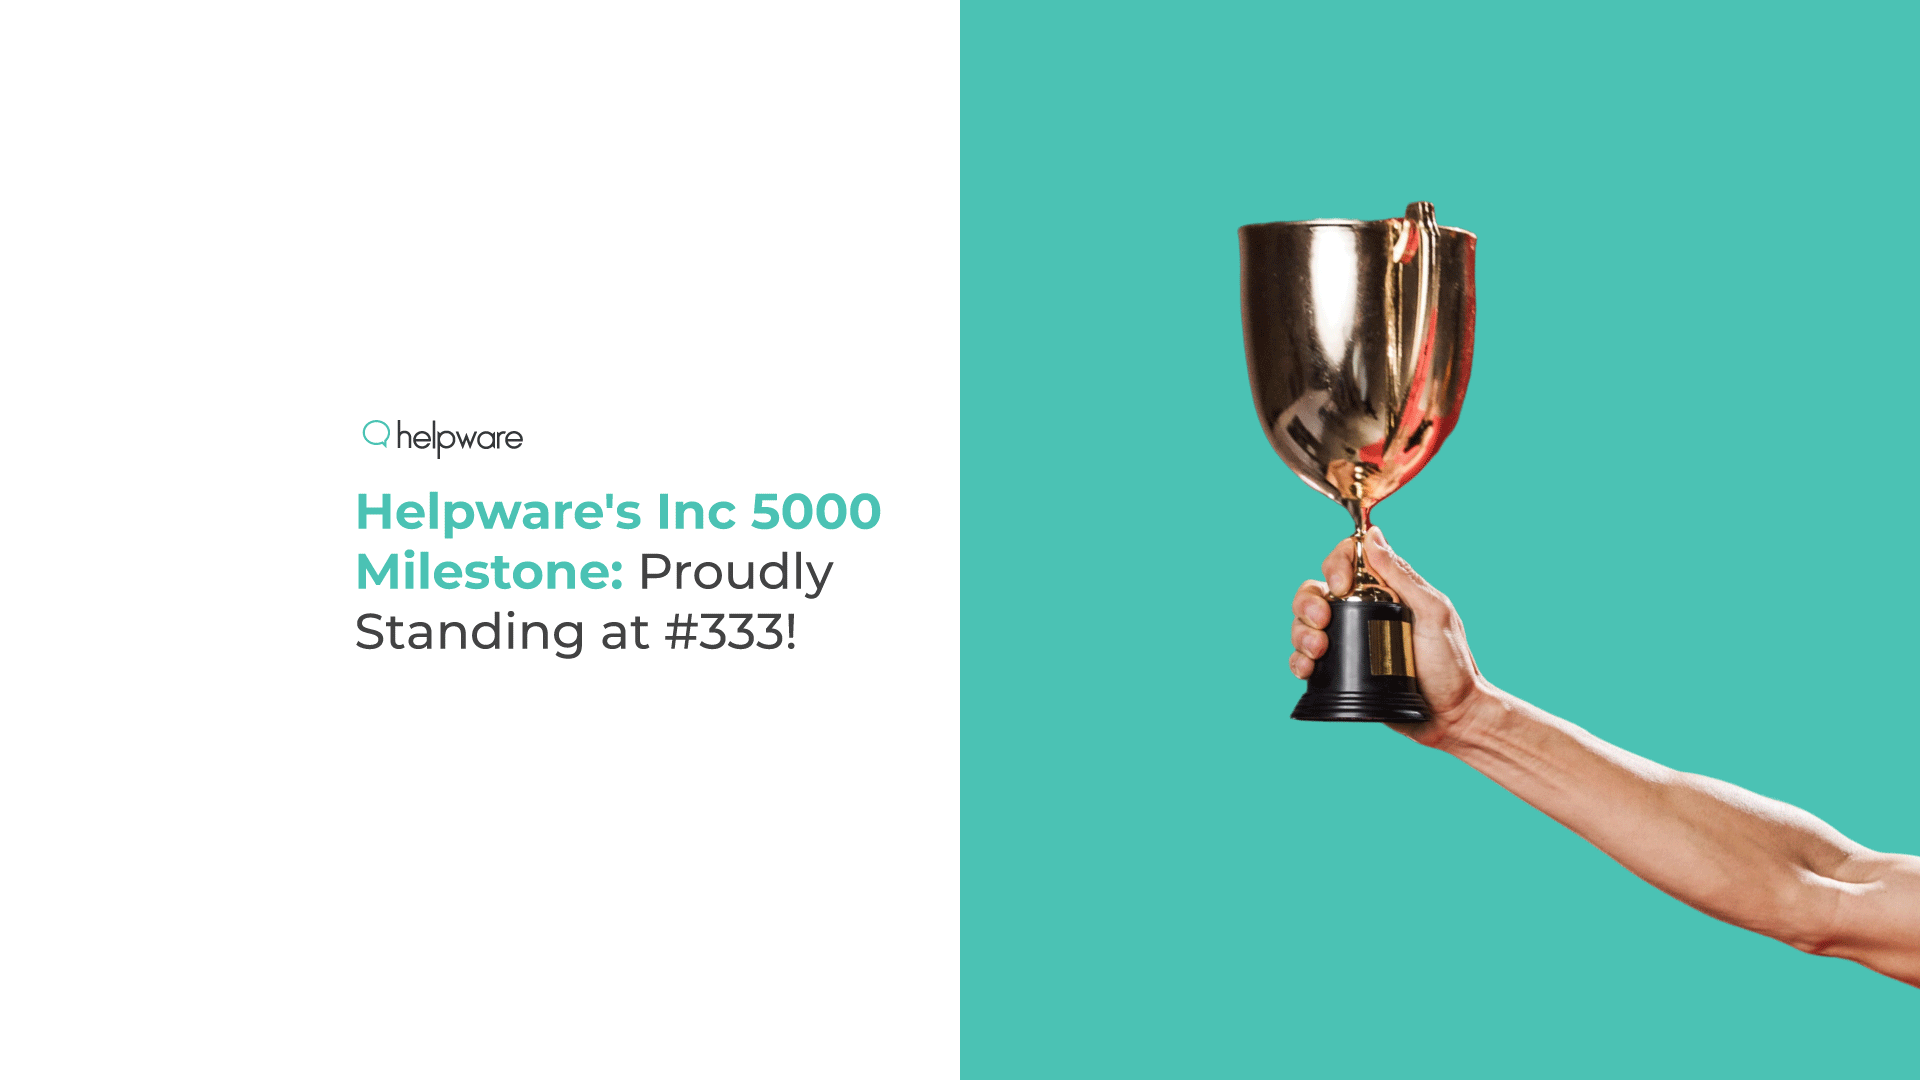 Helpware Ranked #333 on Inc. 5000 List of America’s Fastest-Growing Private Companies